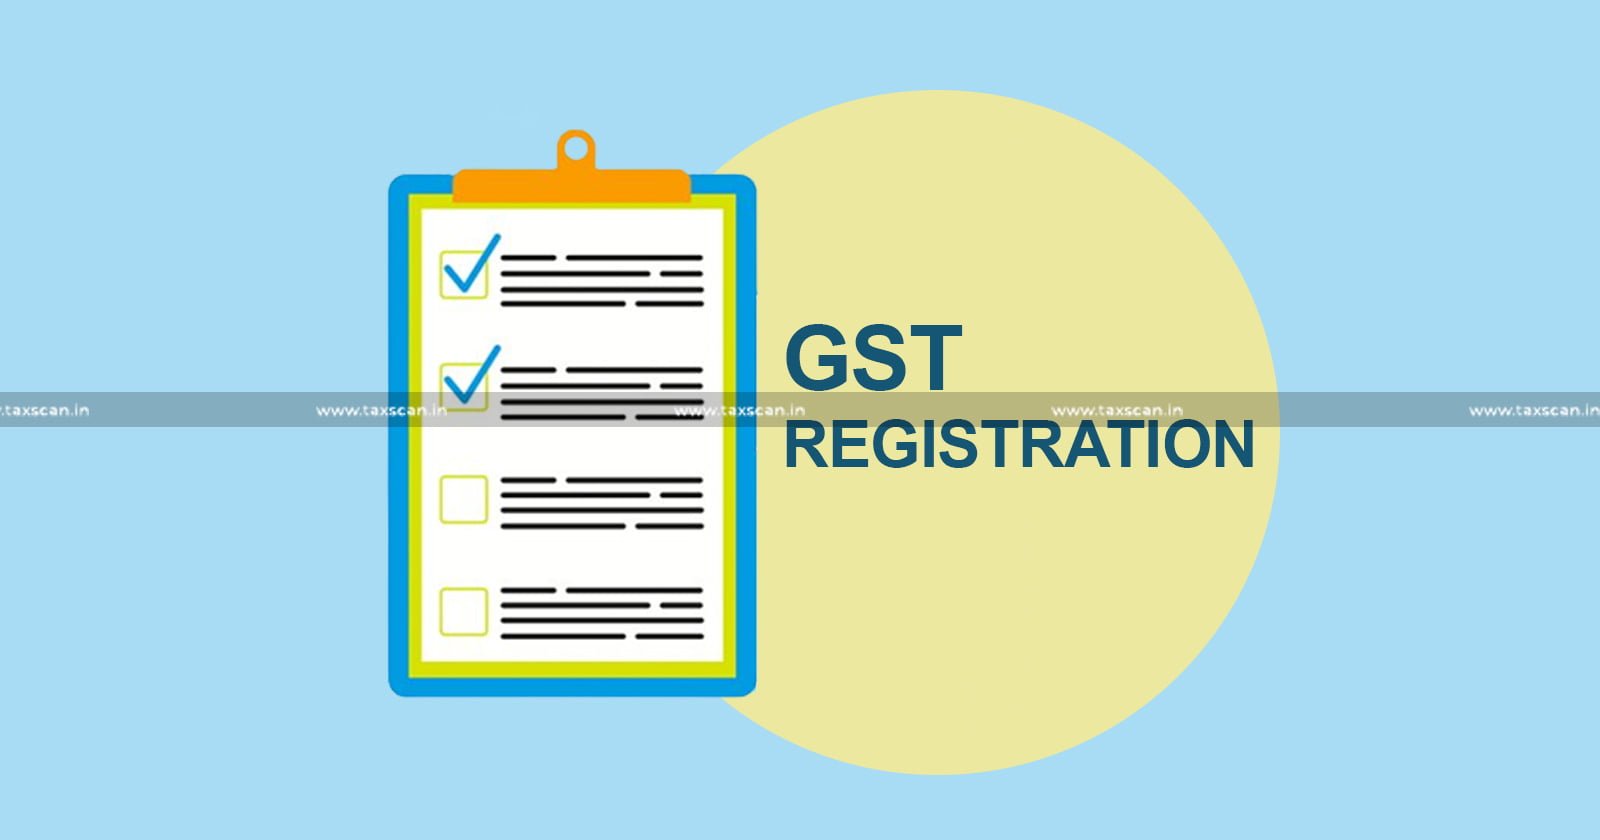 Cancellation Order - GST Registration - without Stating Reason is invalid - Gujarat HC - Cancellation Order of GST Registration - taxscan